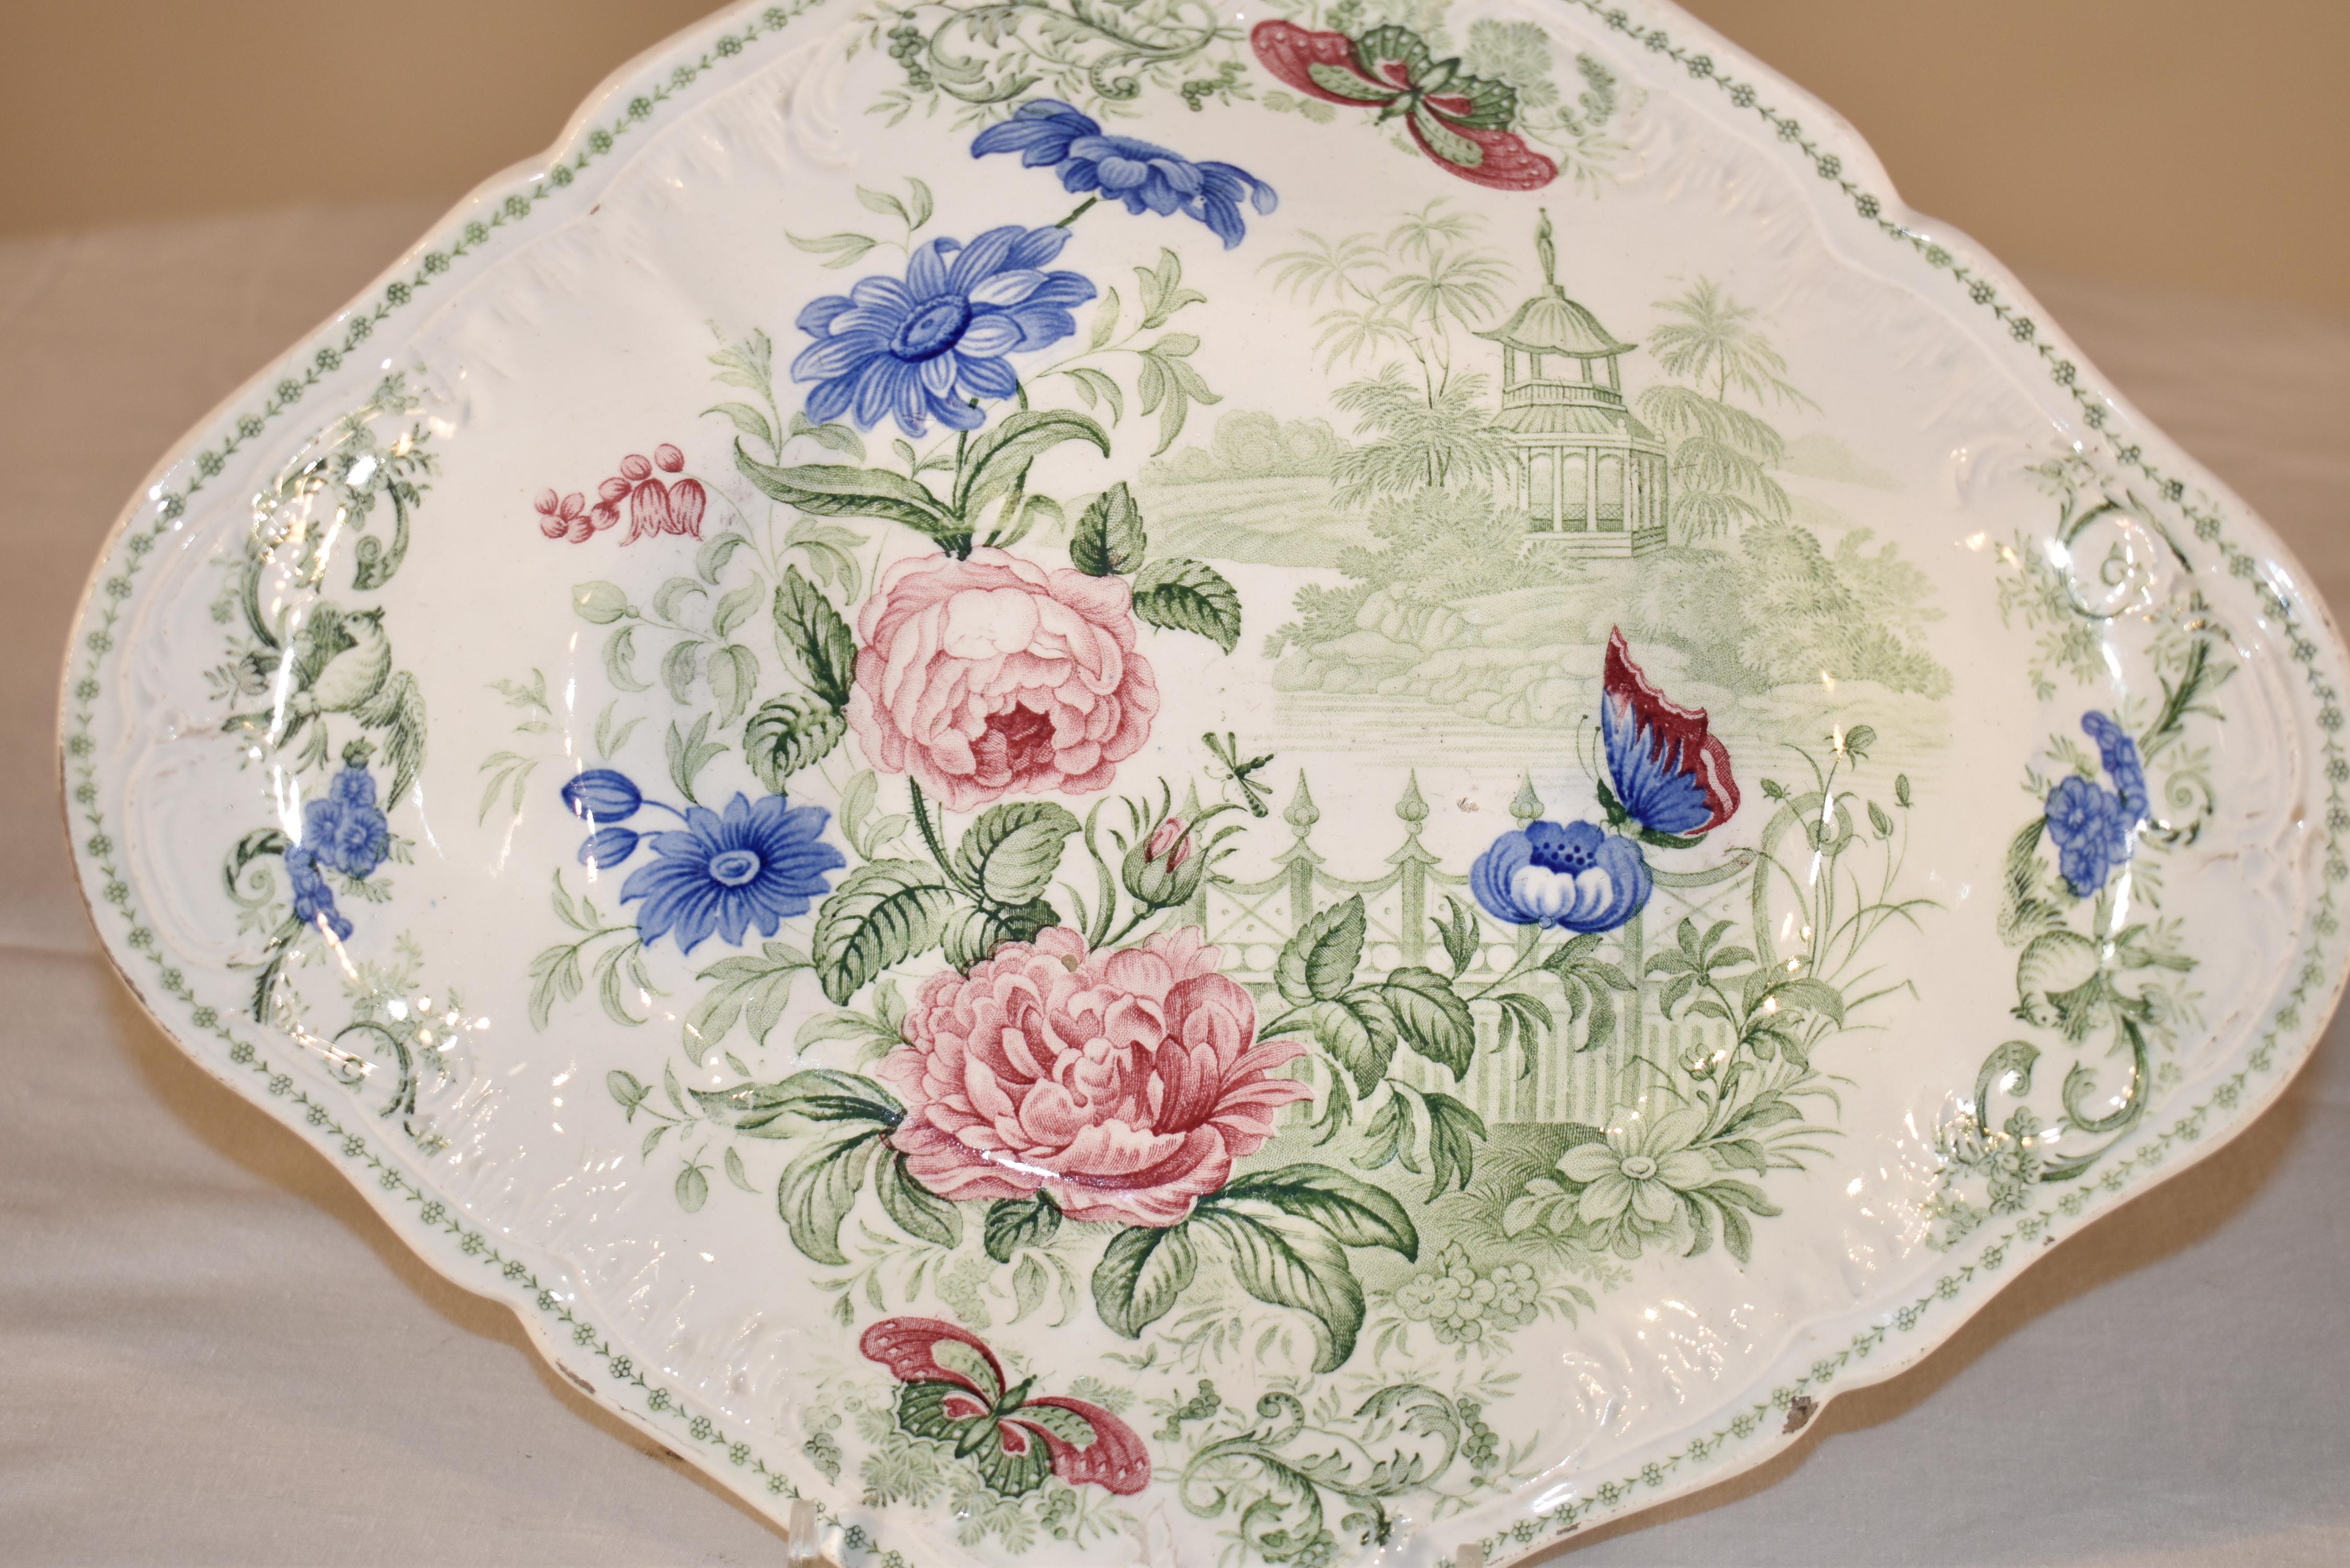 19th century shaped serving dish with multicolored transfer decoration depicting a garden with florals and butterflies in vibrant color. Marked 